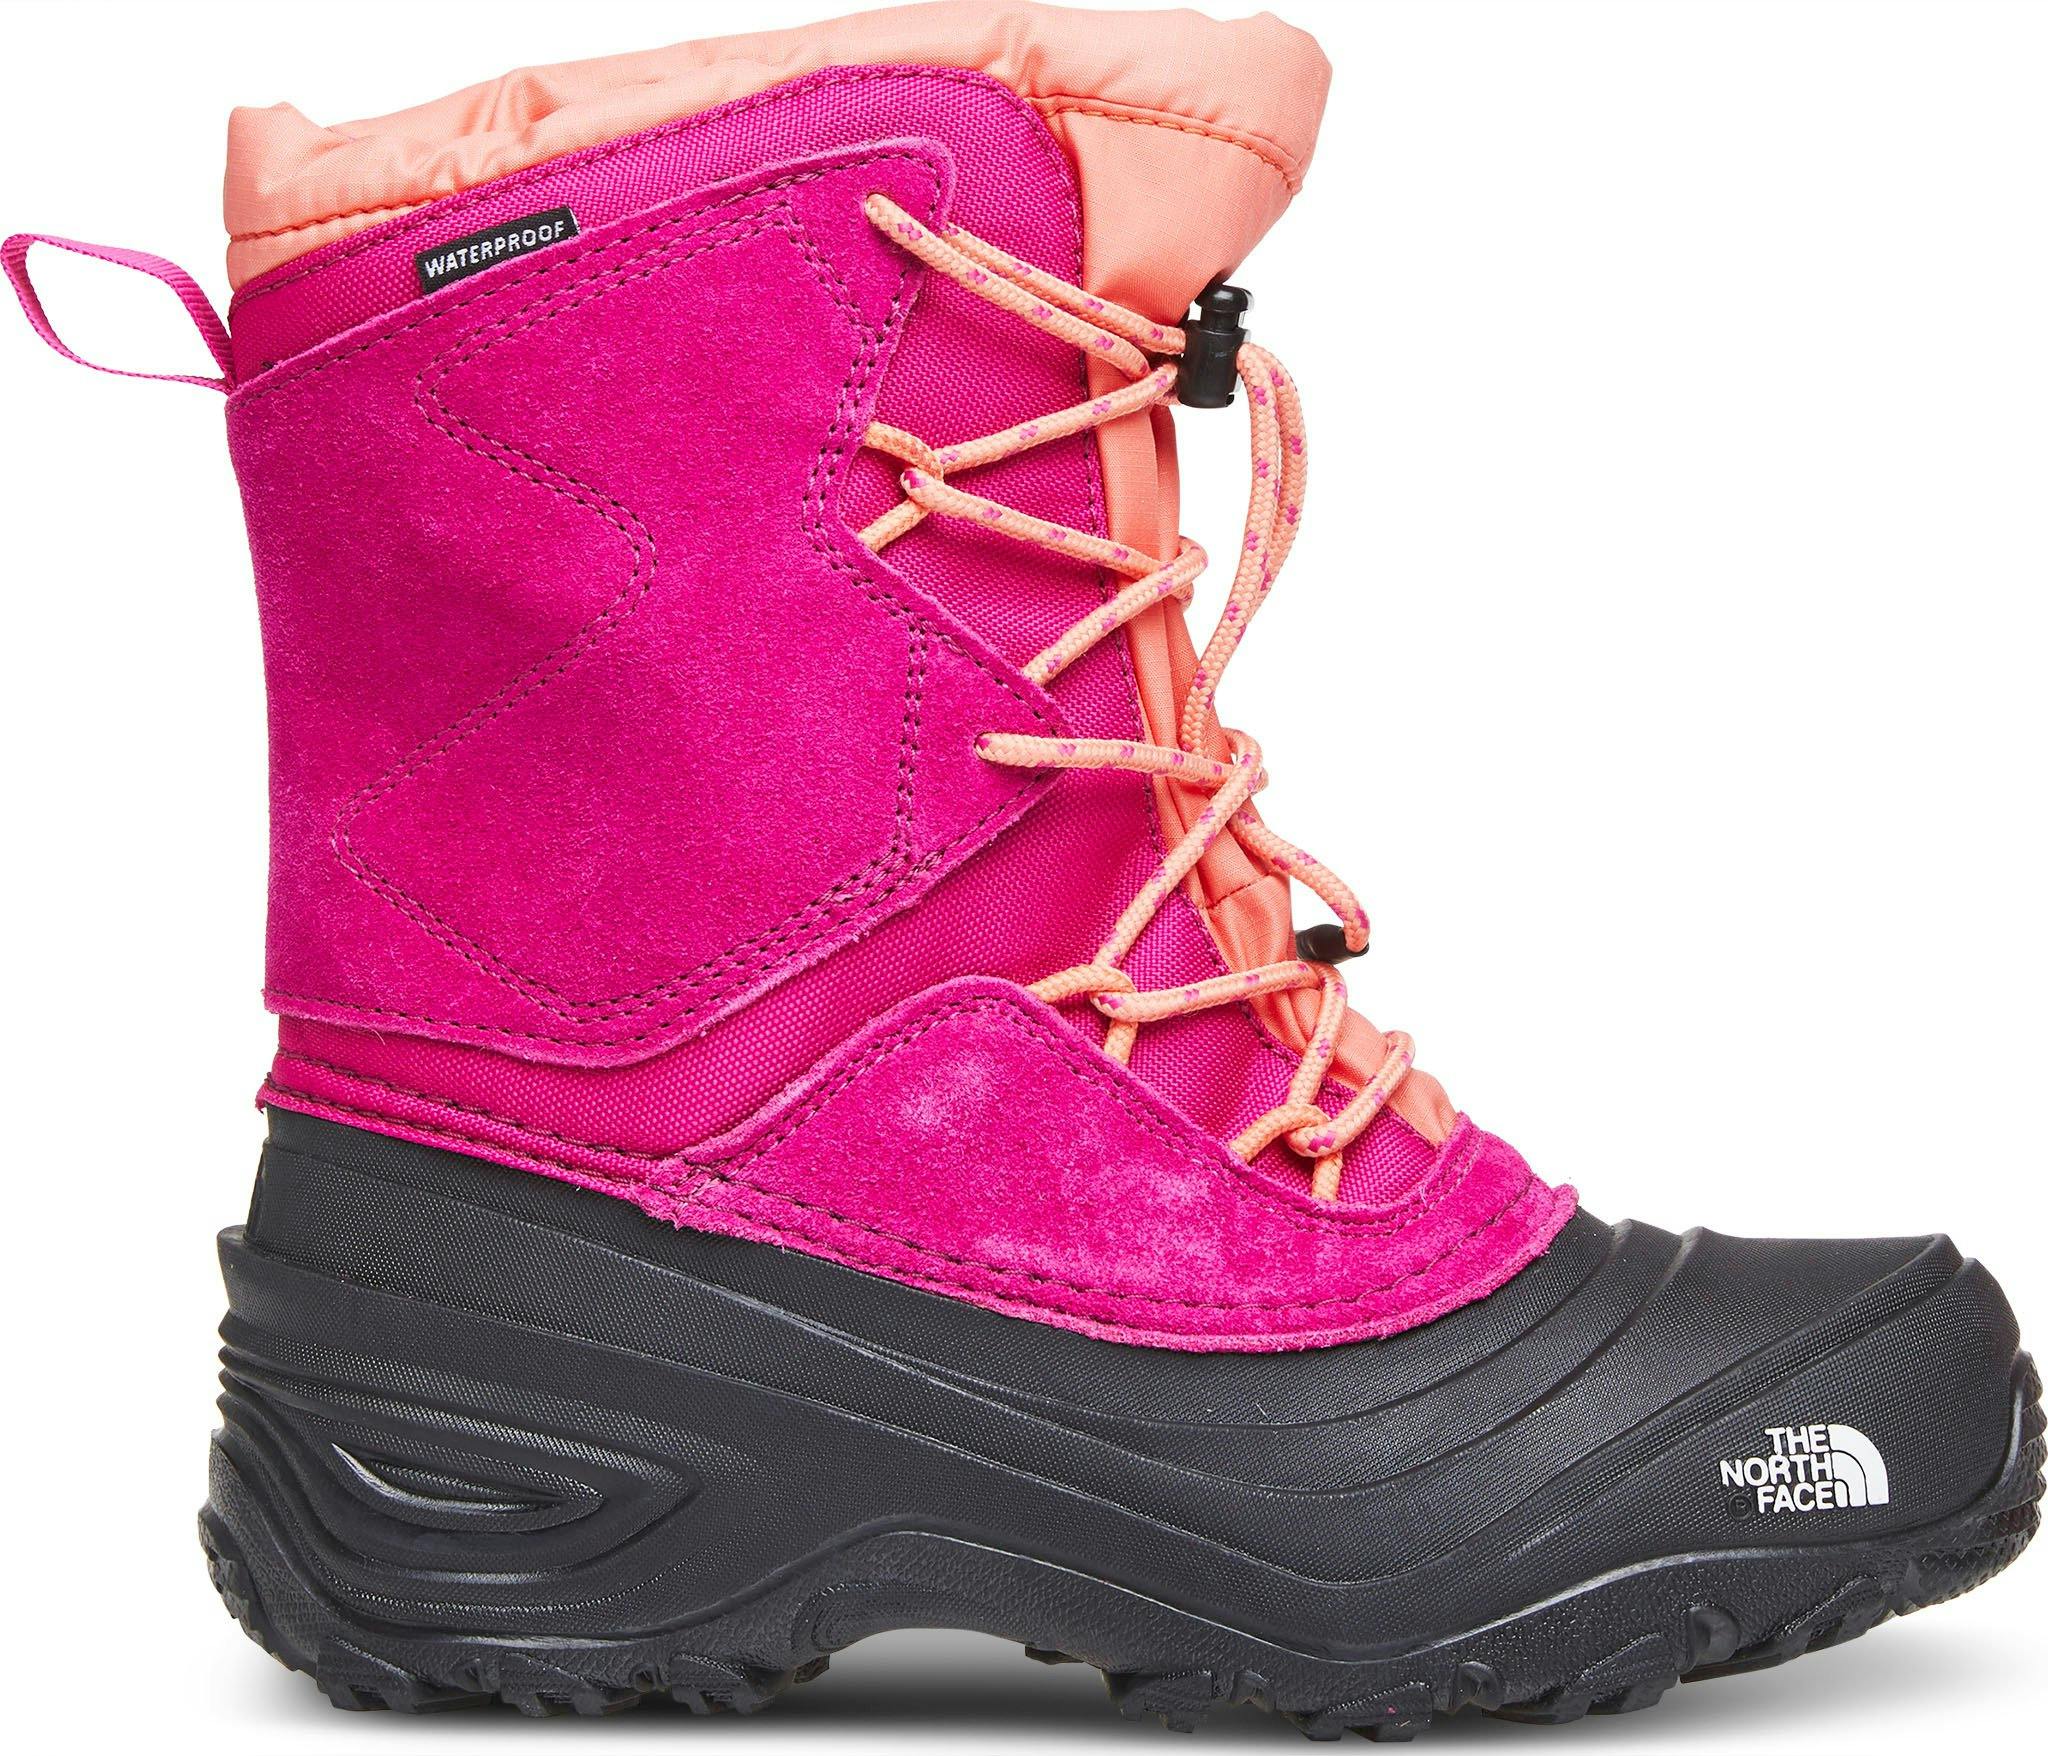 Product image for Alpenglow V Waterproof Boots - Youth